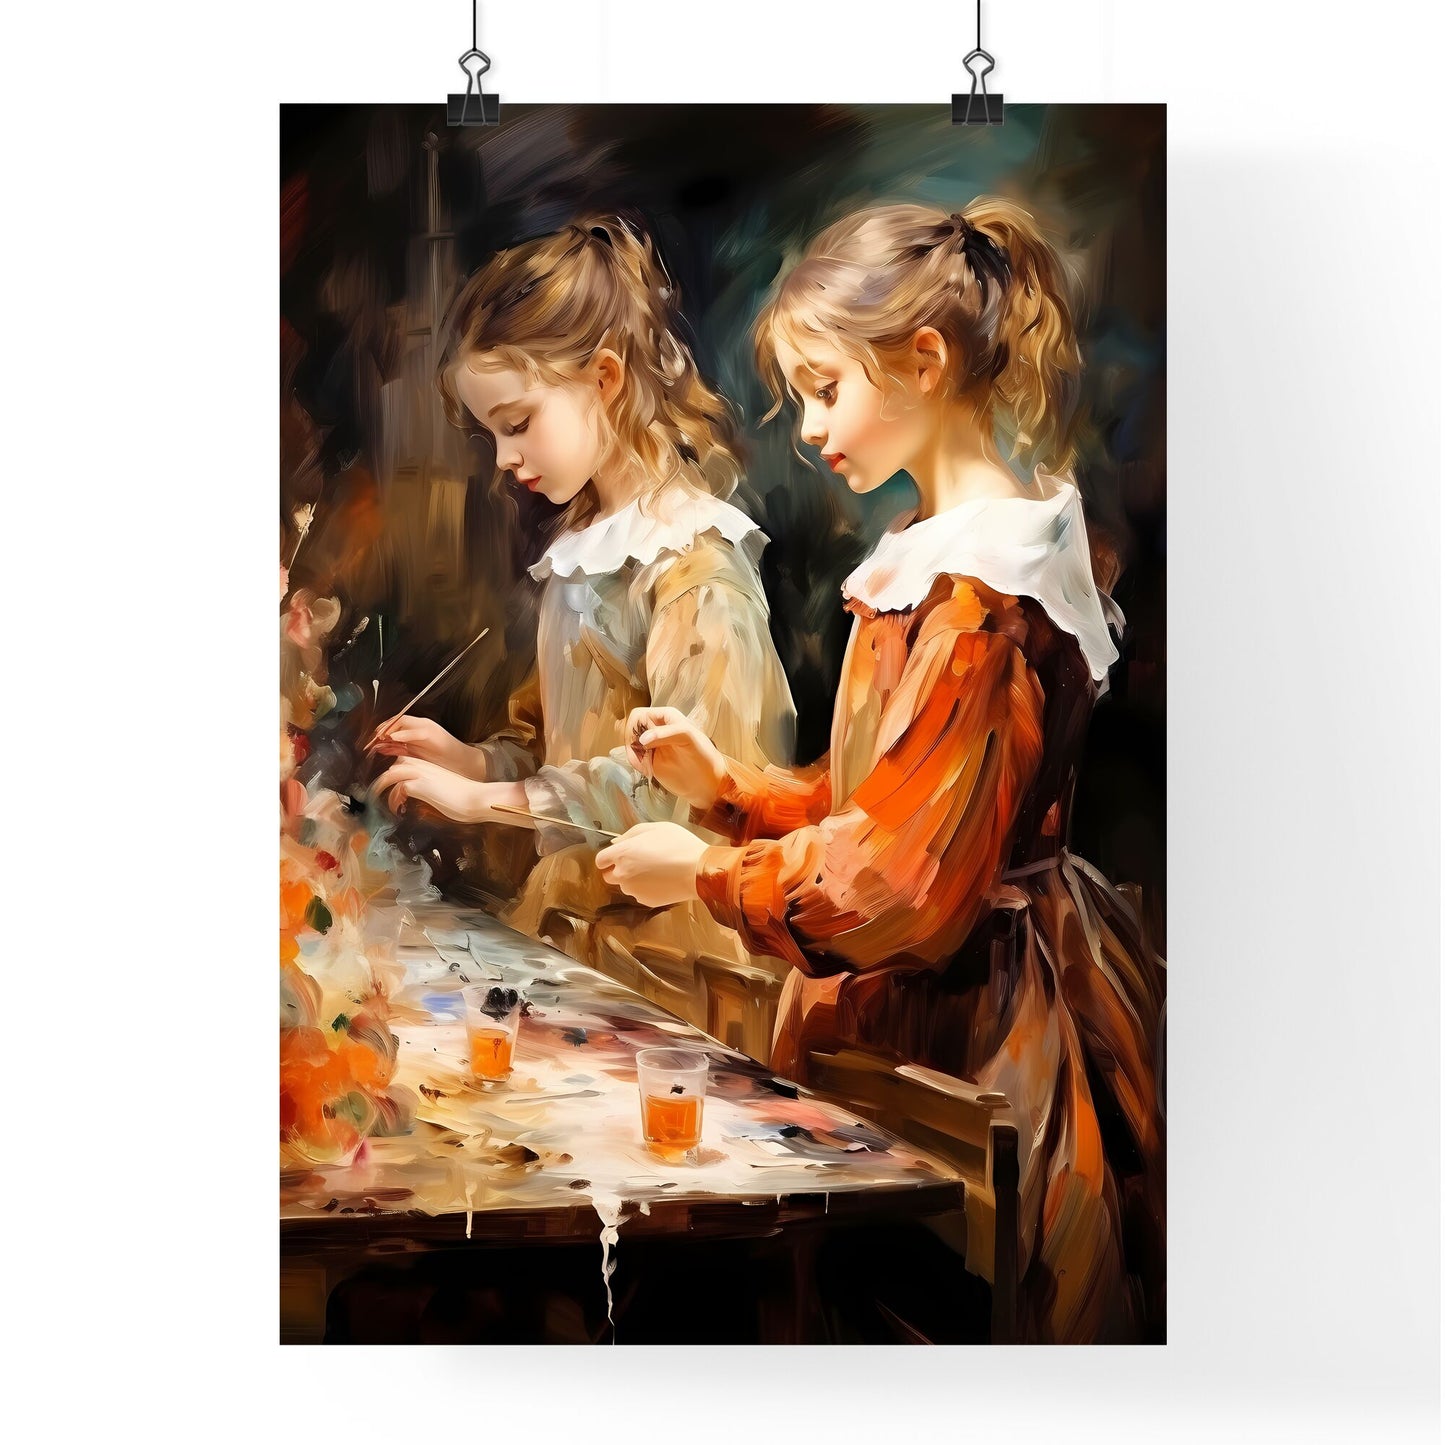 The Art Sisters Doing A Painting - A Painting Of Girls Painting A Picture Default Title